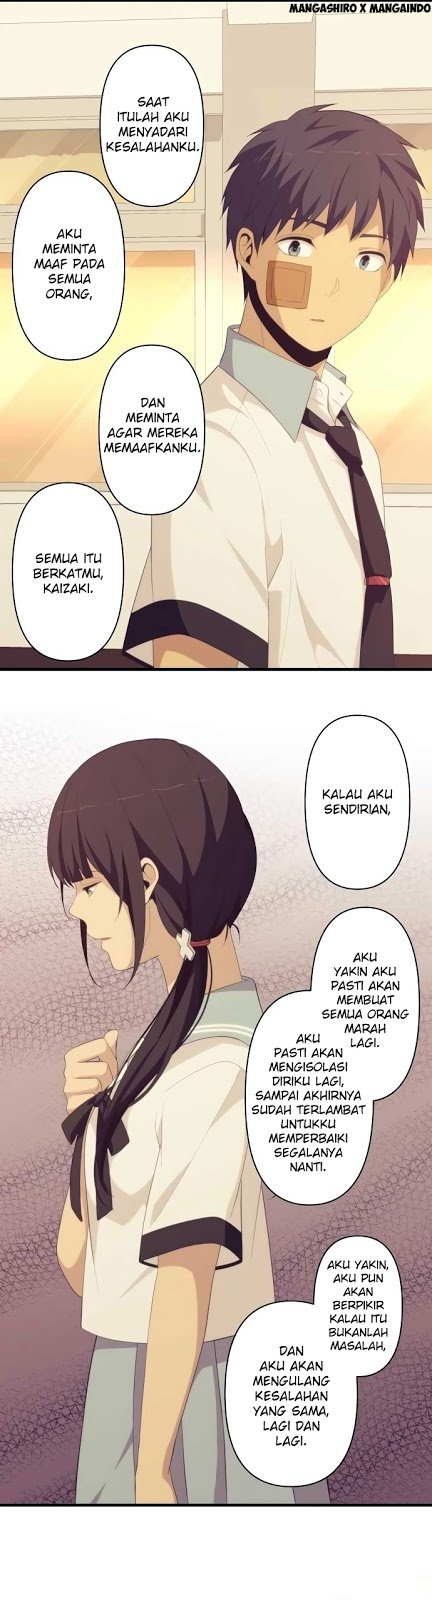 ReLife Chapter 151